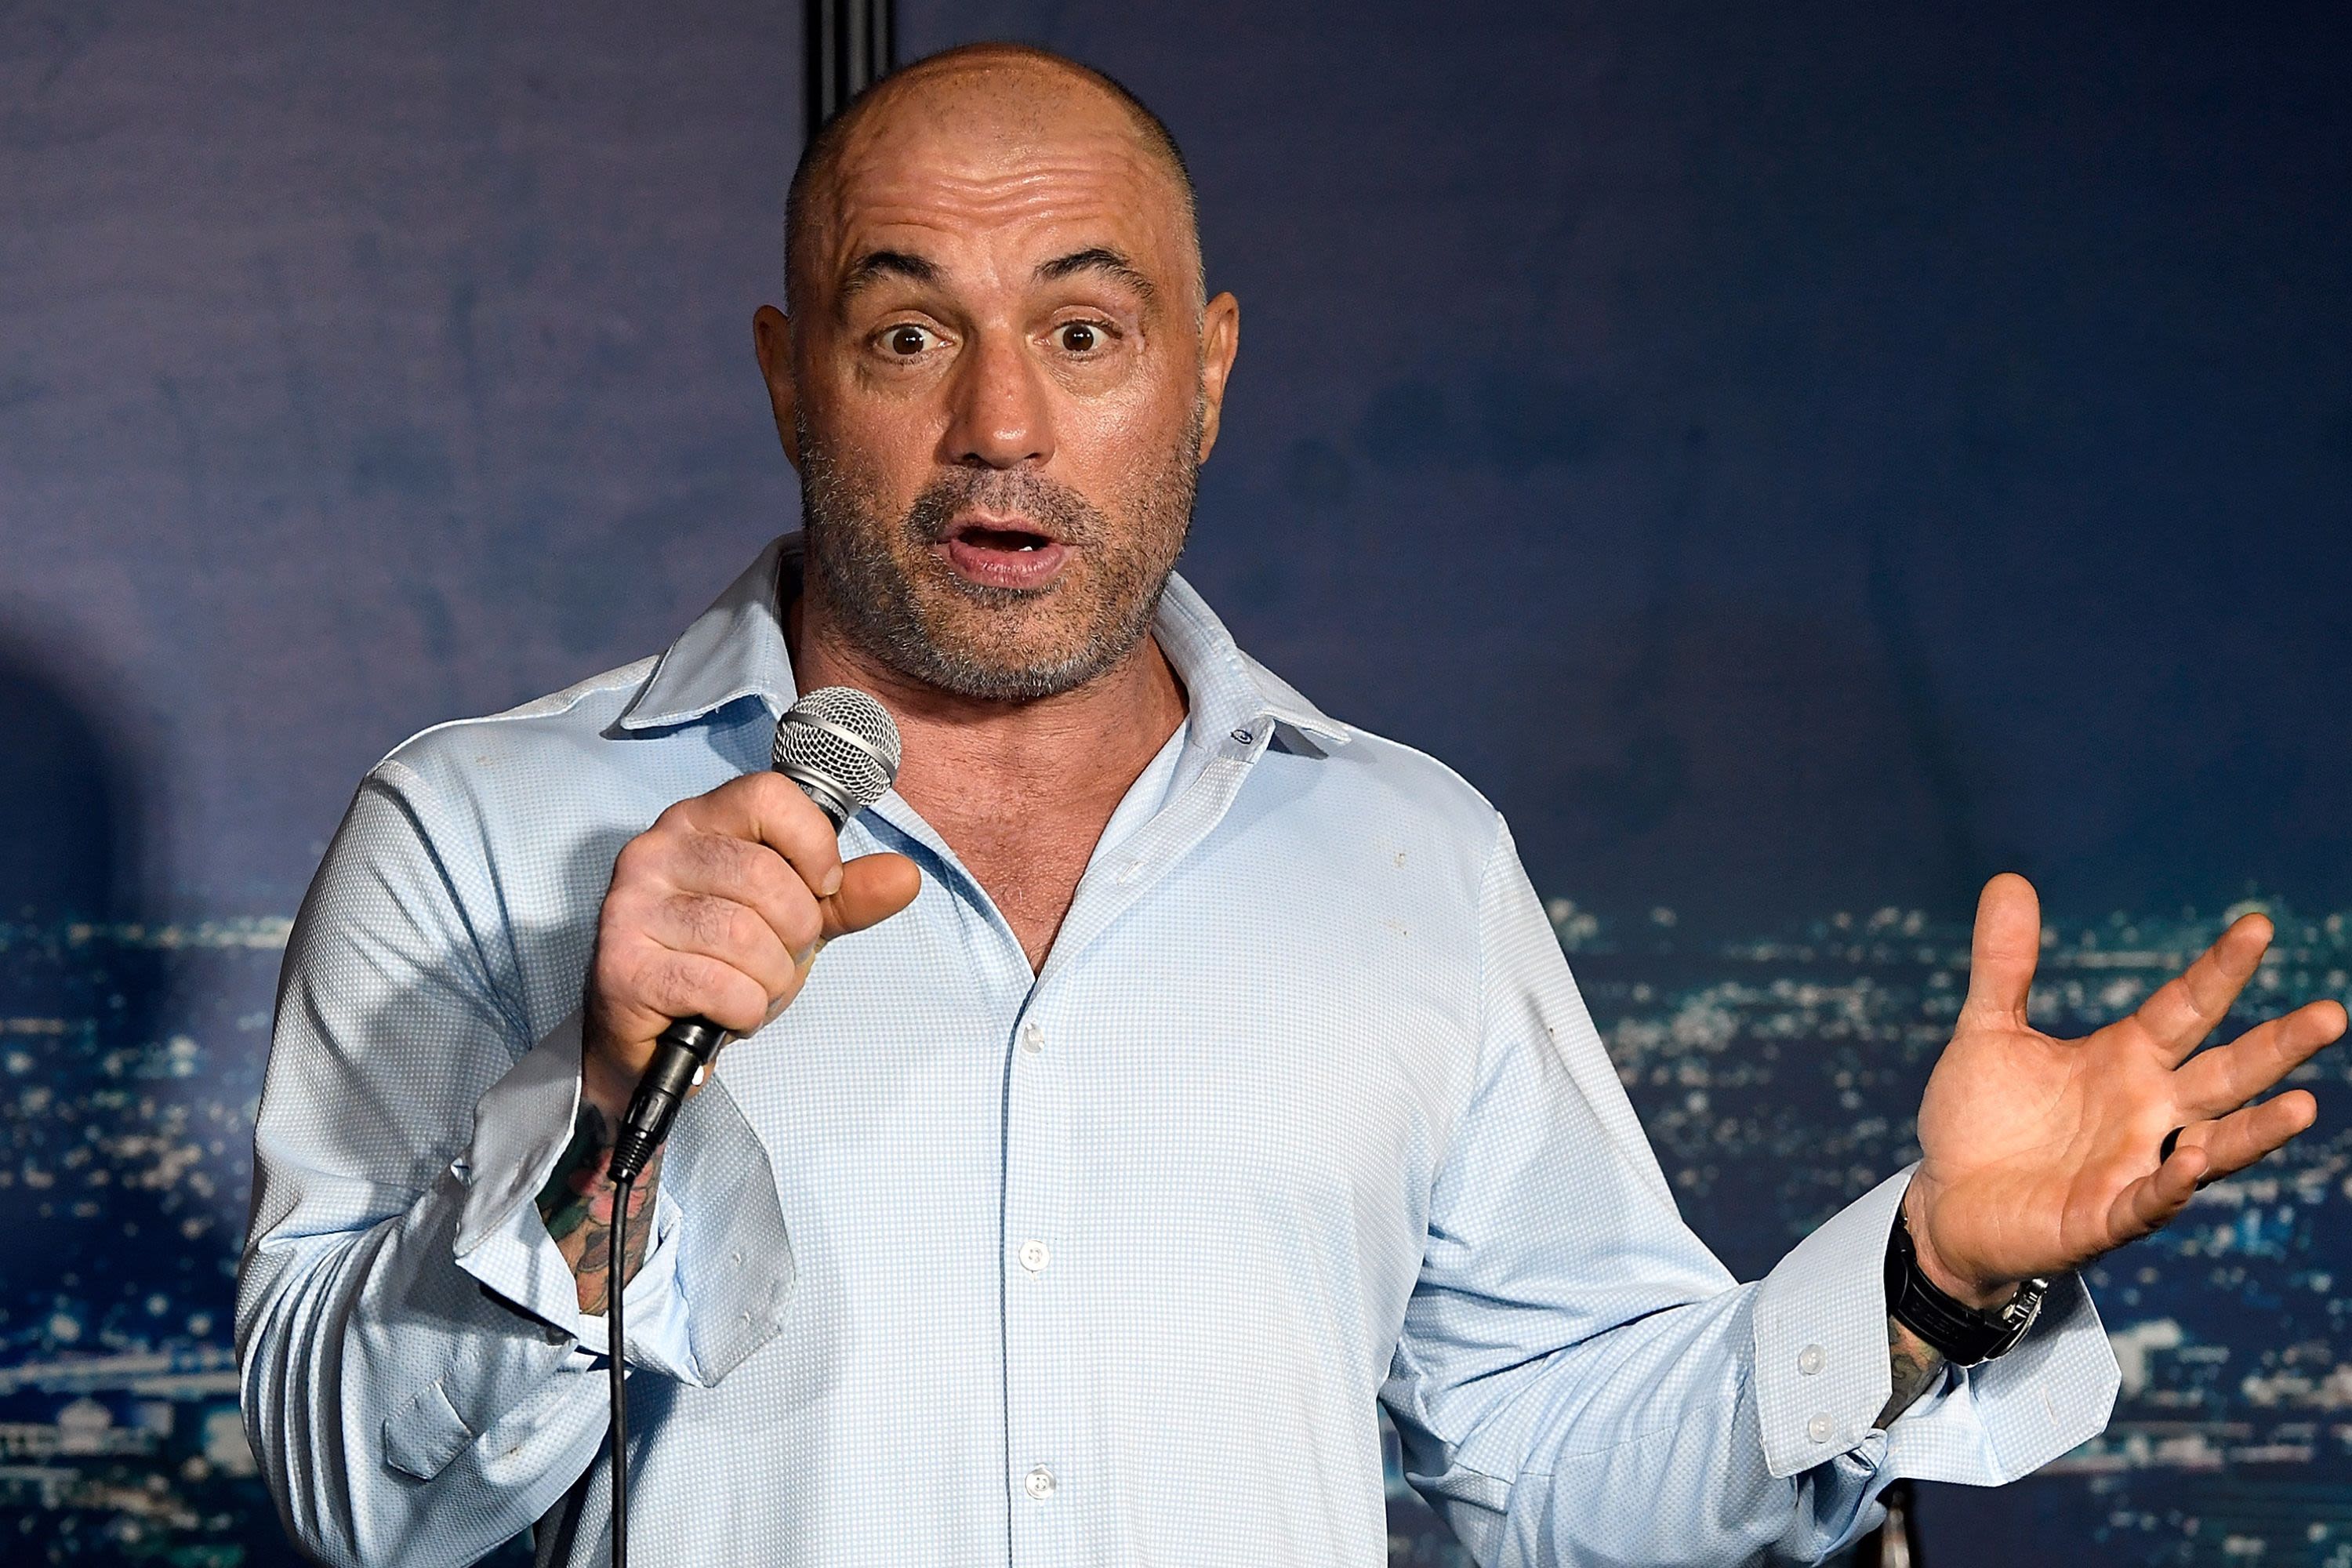 Joe Rogan says he was 'tricked' into making podcast